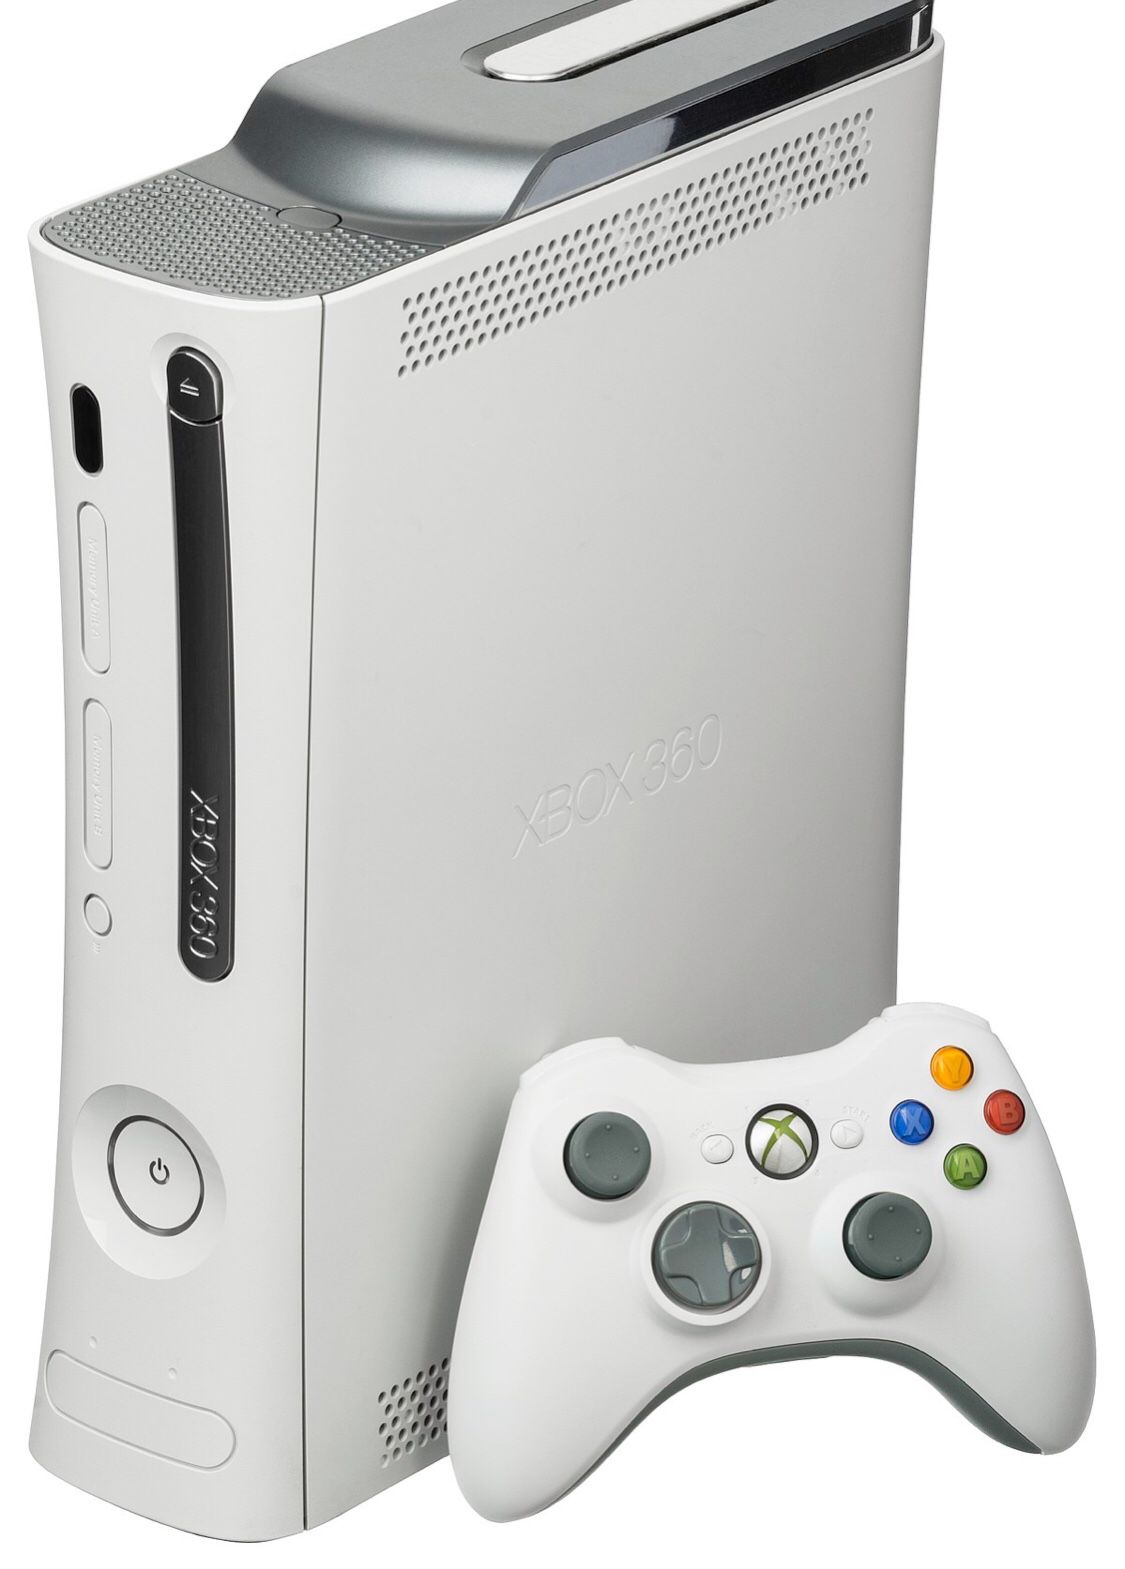 Used Xbox 360 with controller